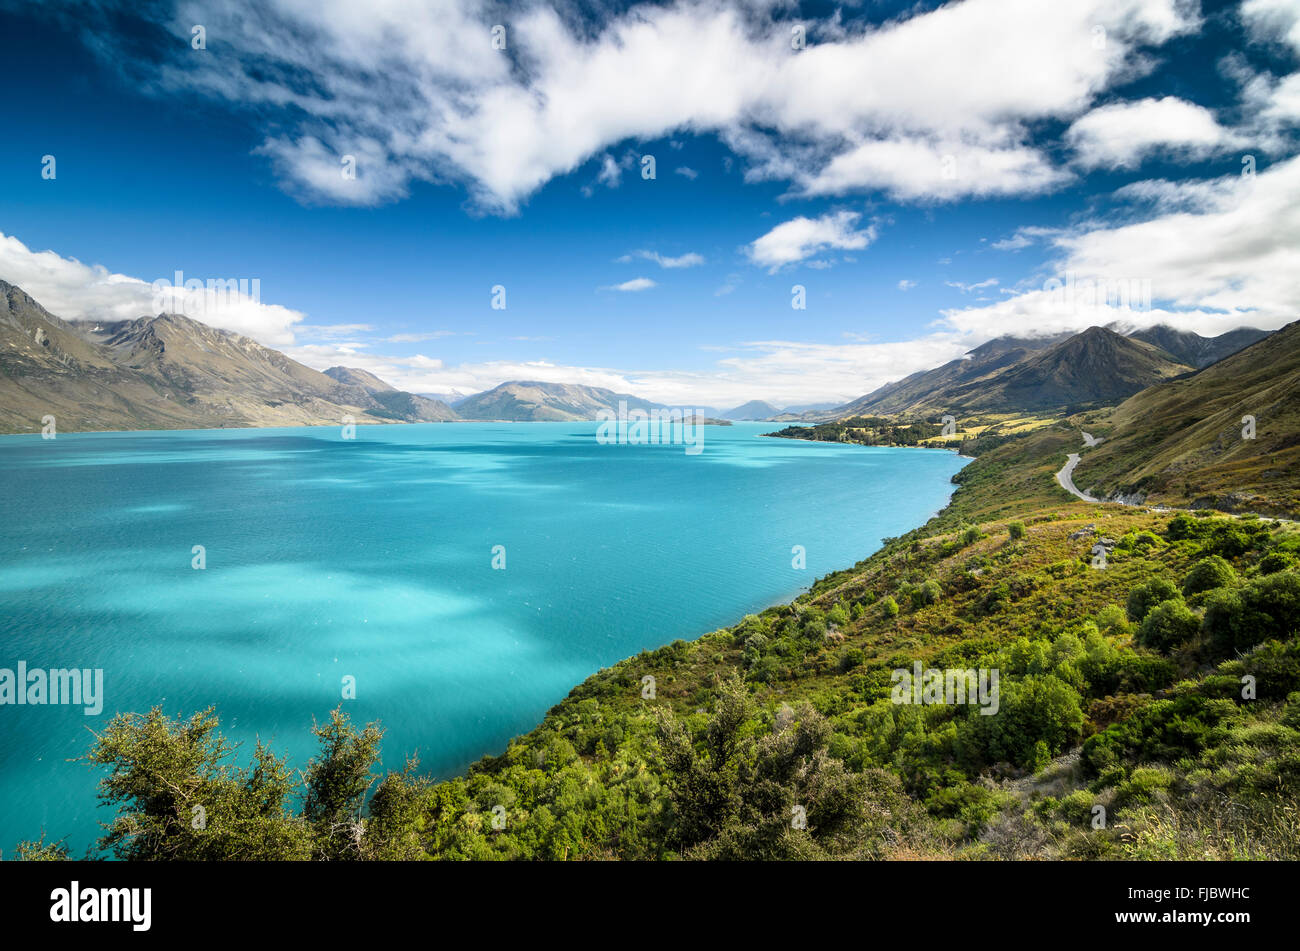 Blue sky with clouds over turquoise lake, Lake Wakatipu, right Glenorchy-Queenstown Road, New Zealand, South Island Stock Photo